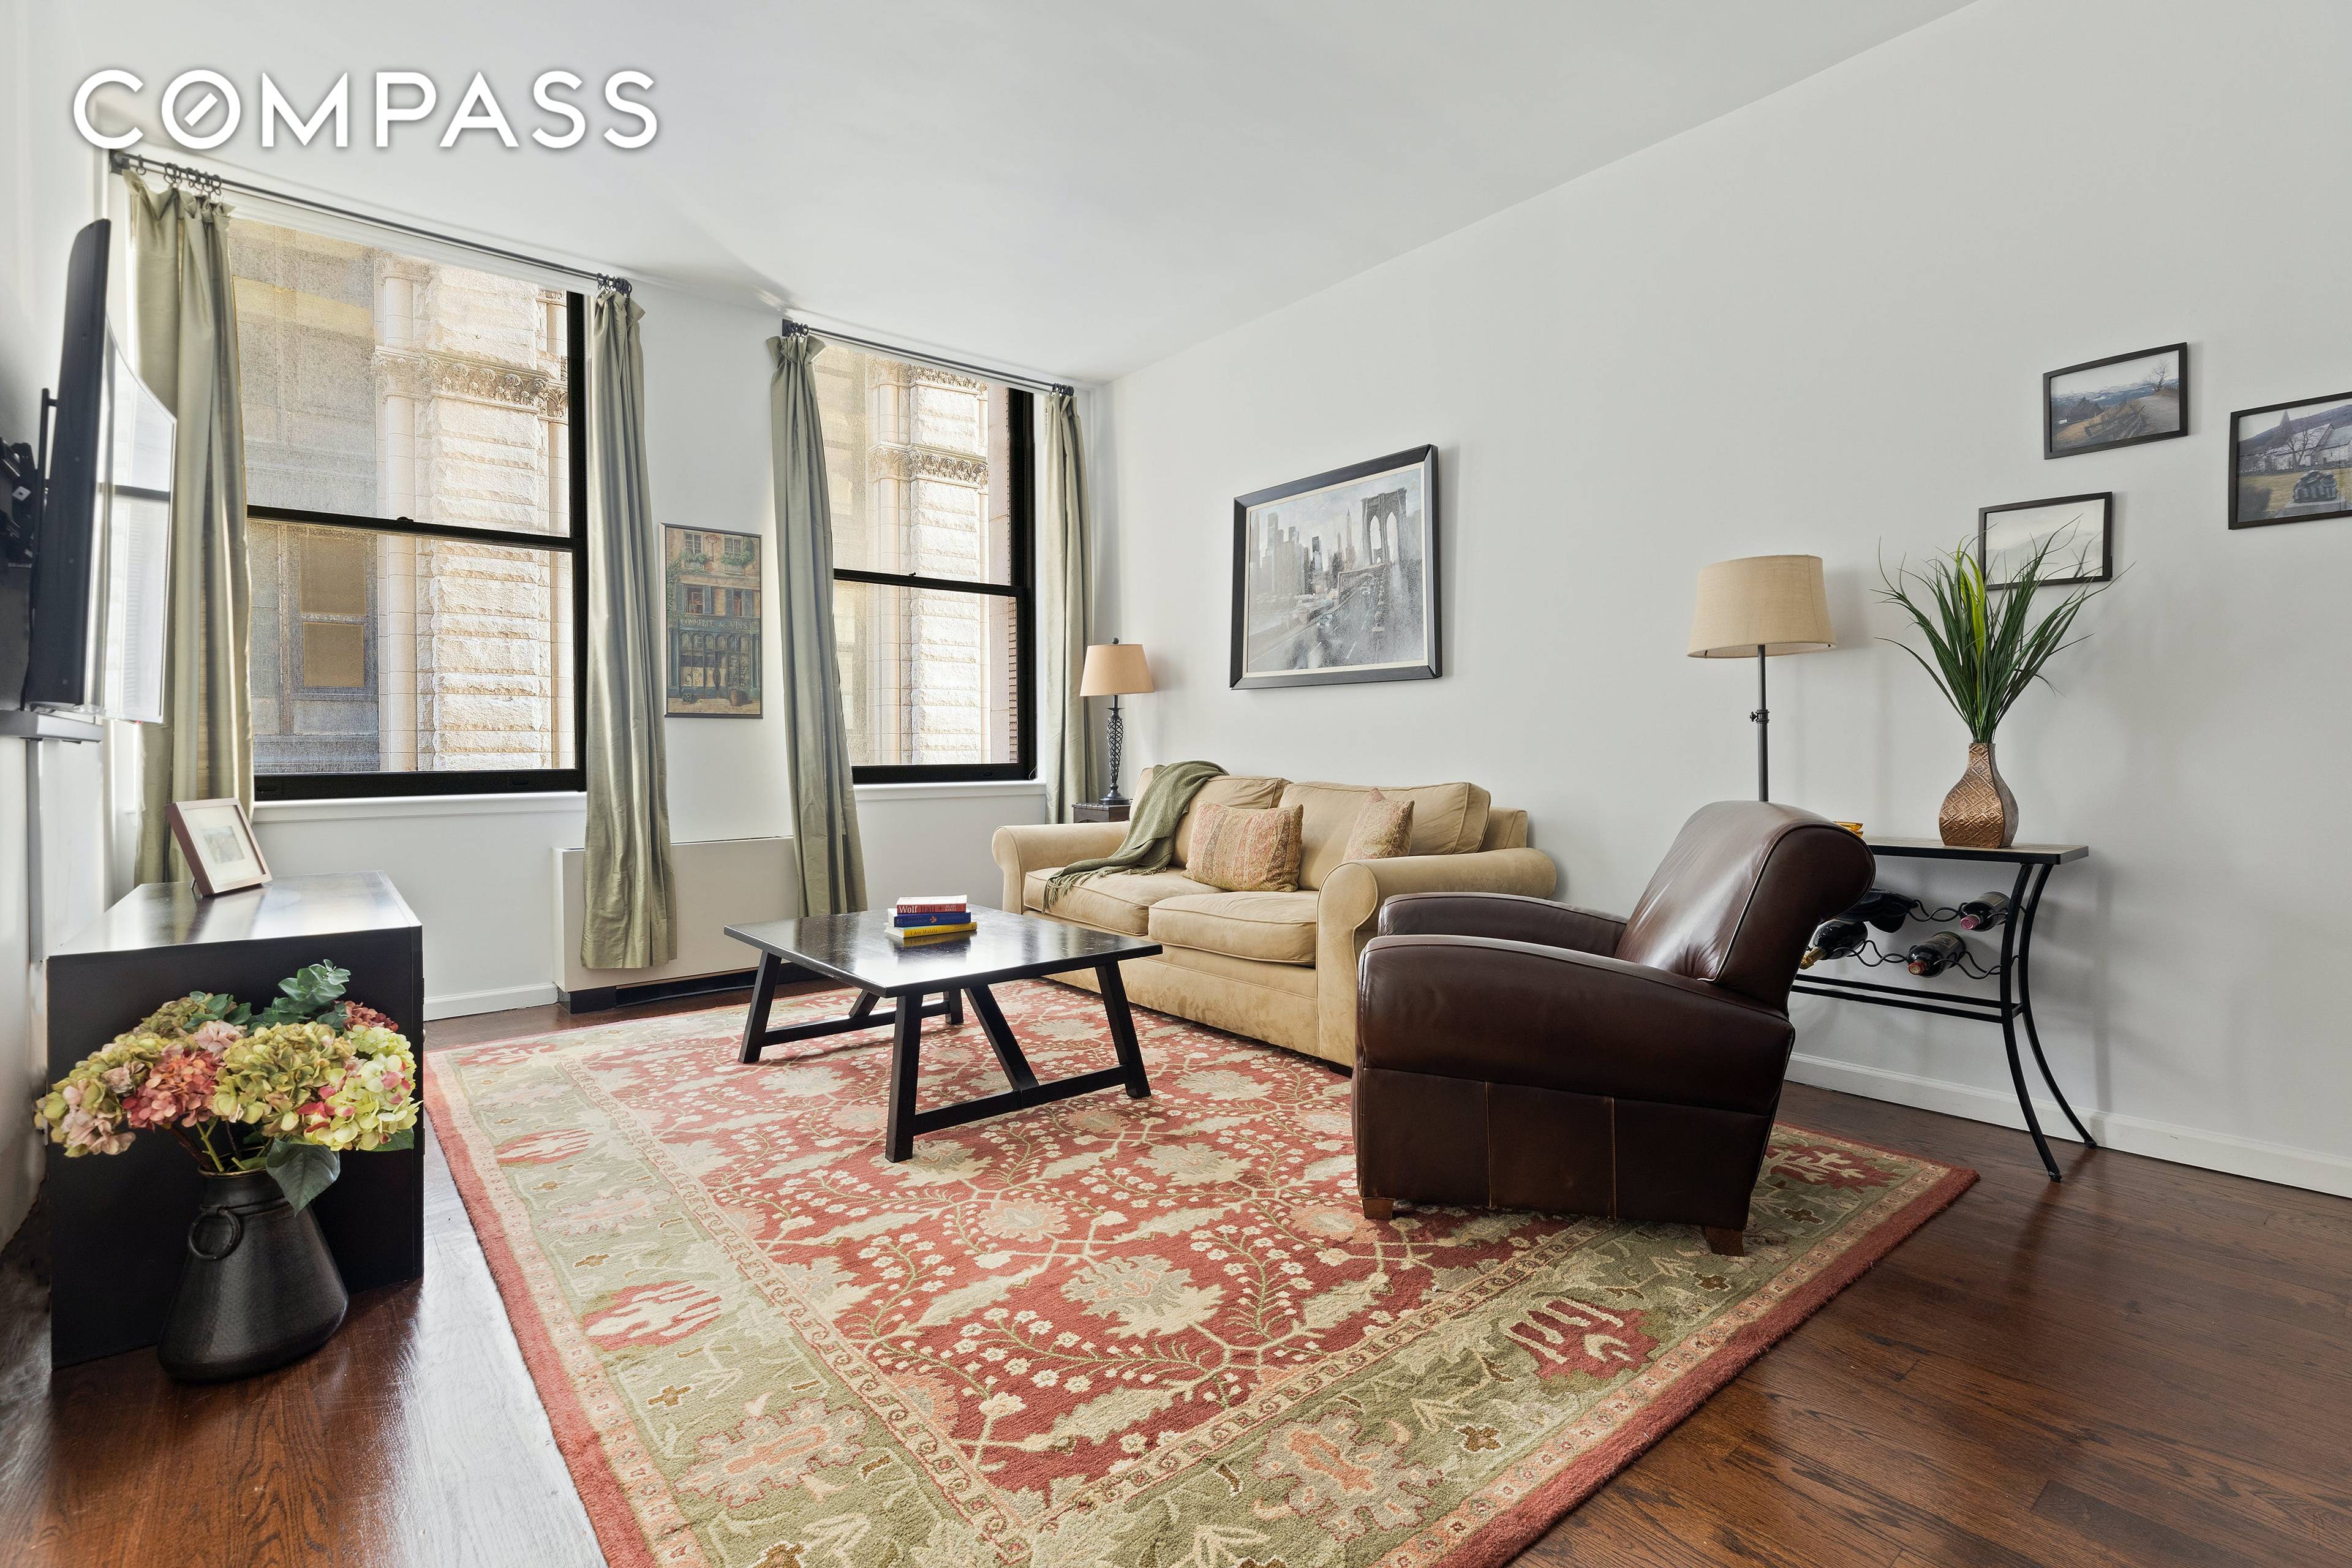 Welcome to 150 Nassau Street 8B, a quiet and loft like one bedroom condo located at the crossroads of City Hall Park, TriBeCa and FiDi.